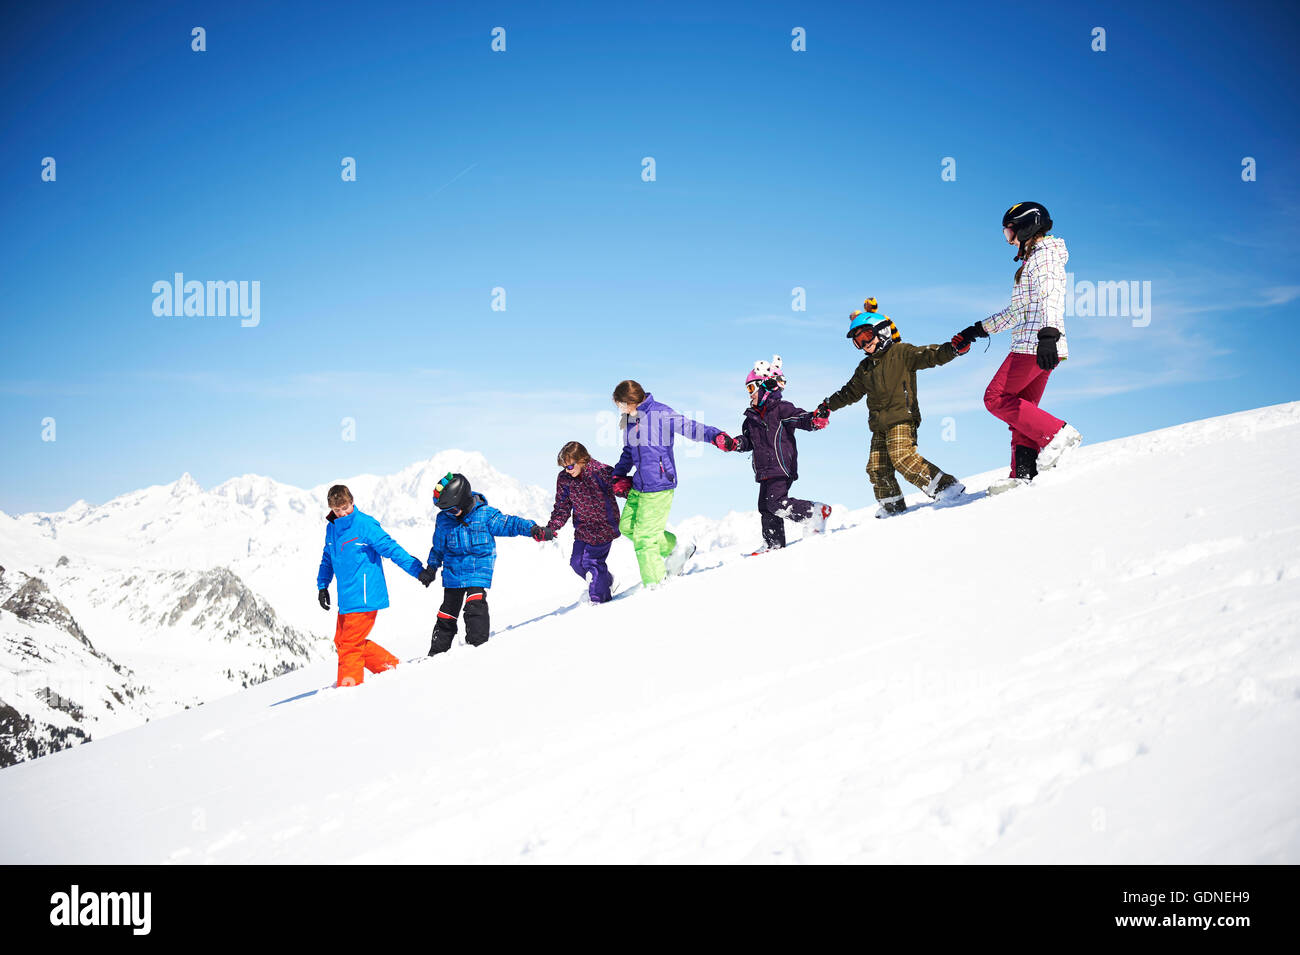 Group of children holding hands on snowy slope Stock Photo